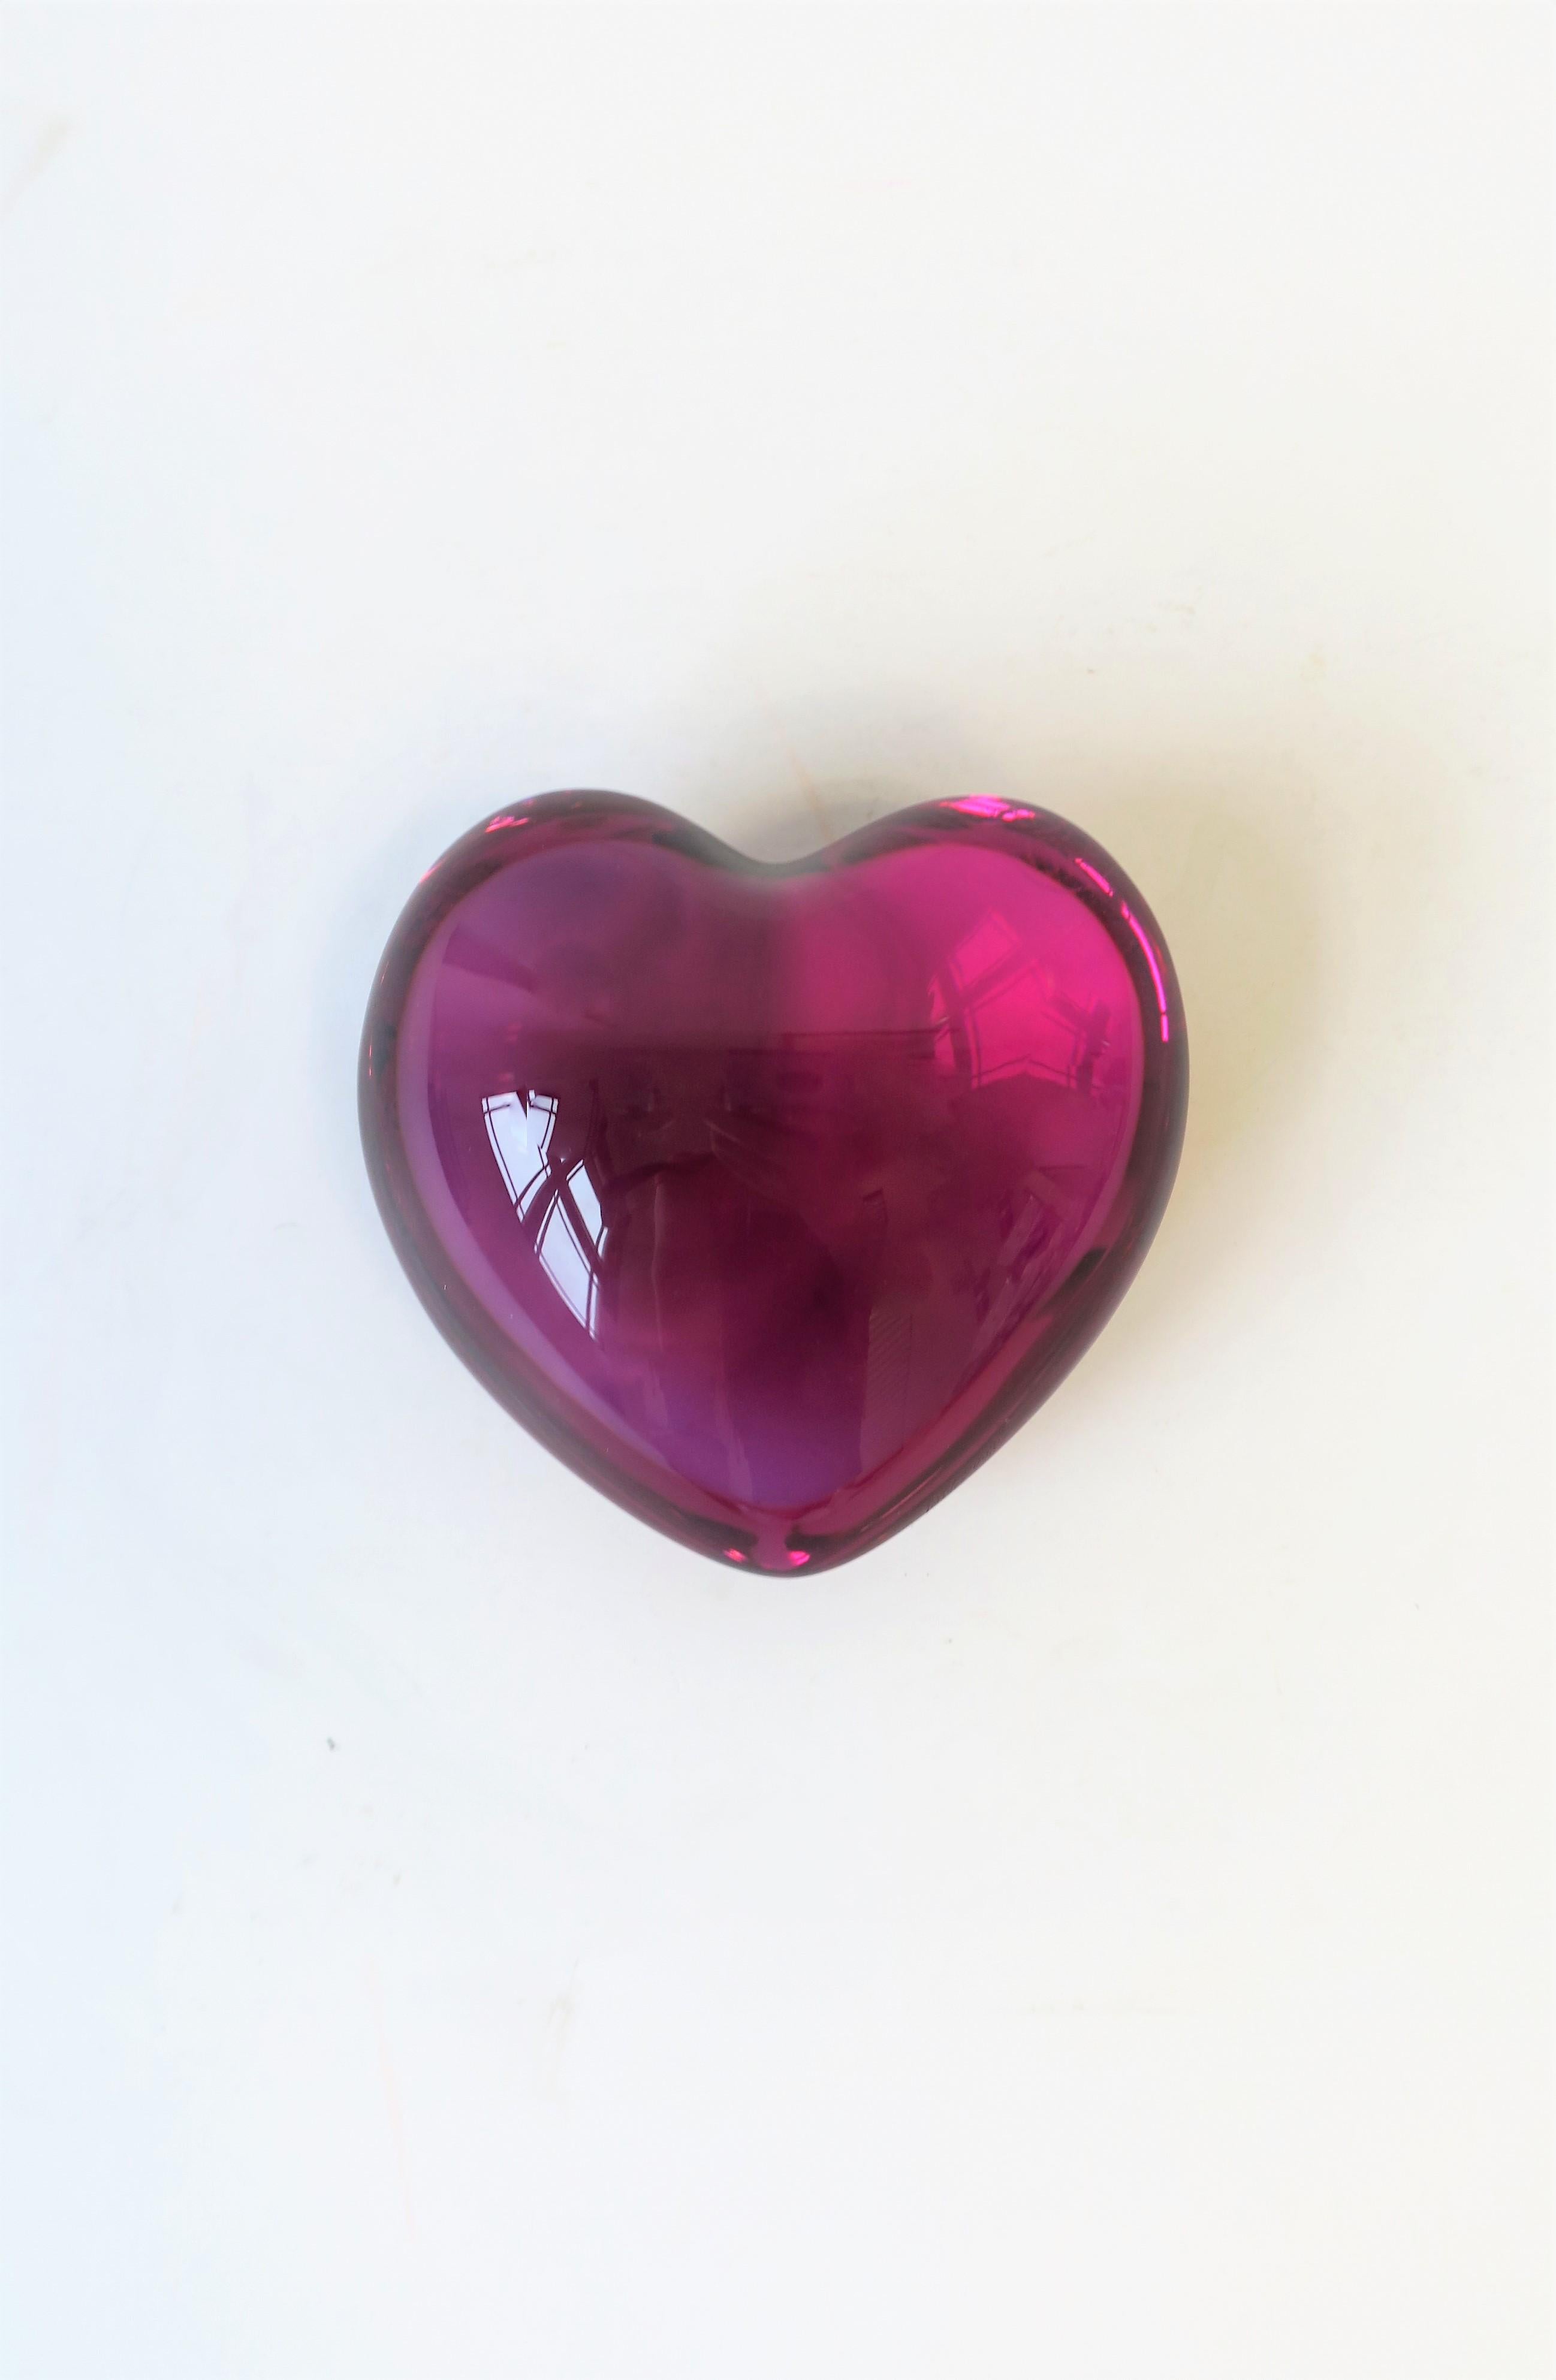 From luxury crystal maker Baccarat a beautiful red raspberry heart paperweight or decorative object with original box, circa early 21st Century. Heart is laser cut with a small 